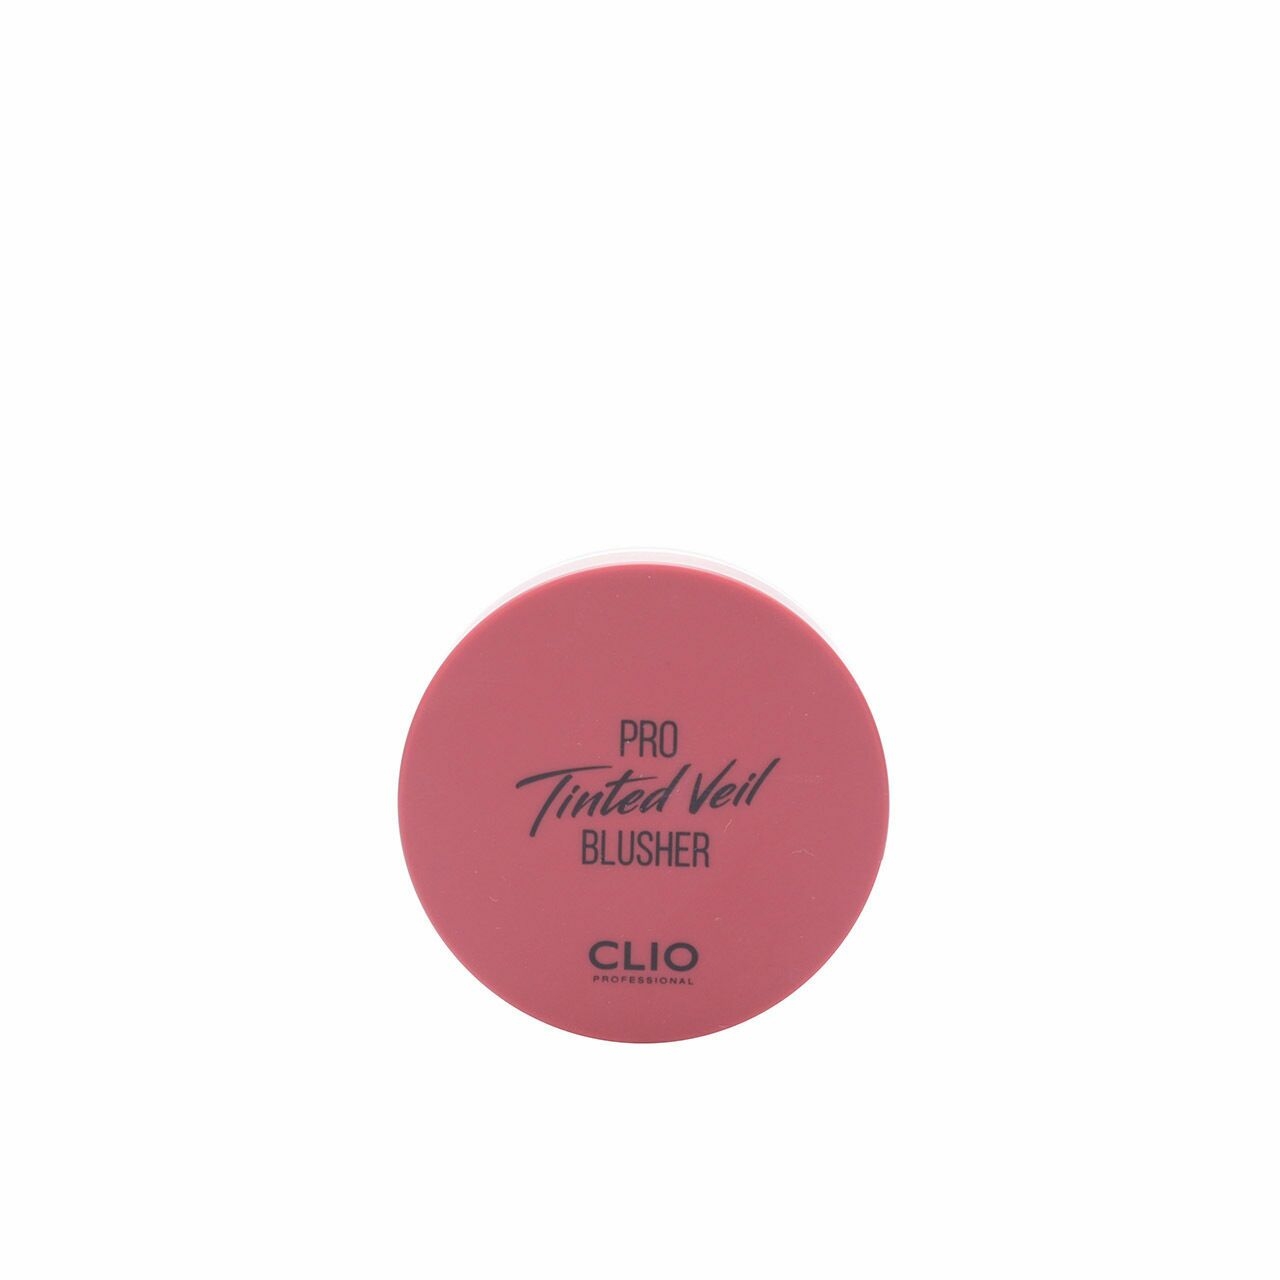 Clio Pro Tinted Veil Blusher 02 Watch Out Faces